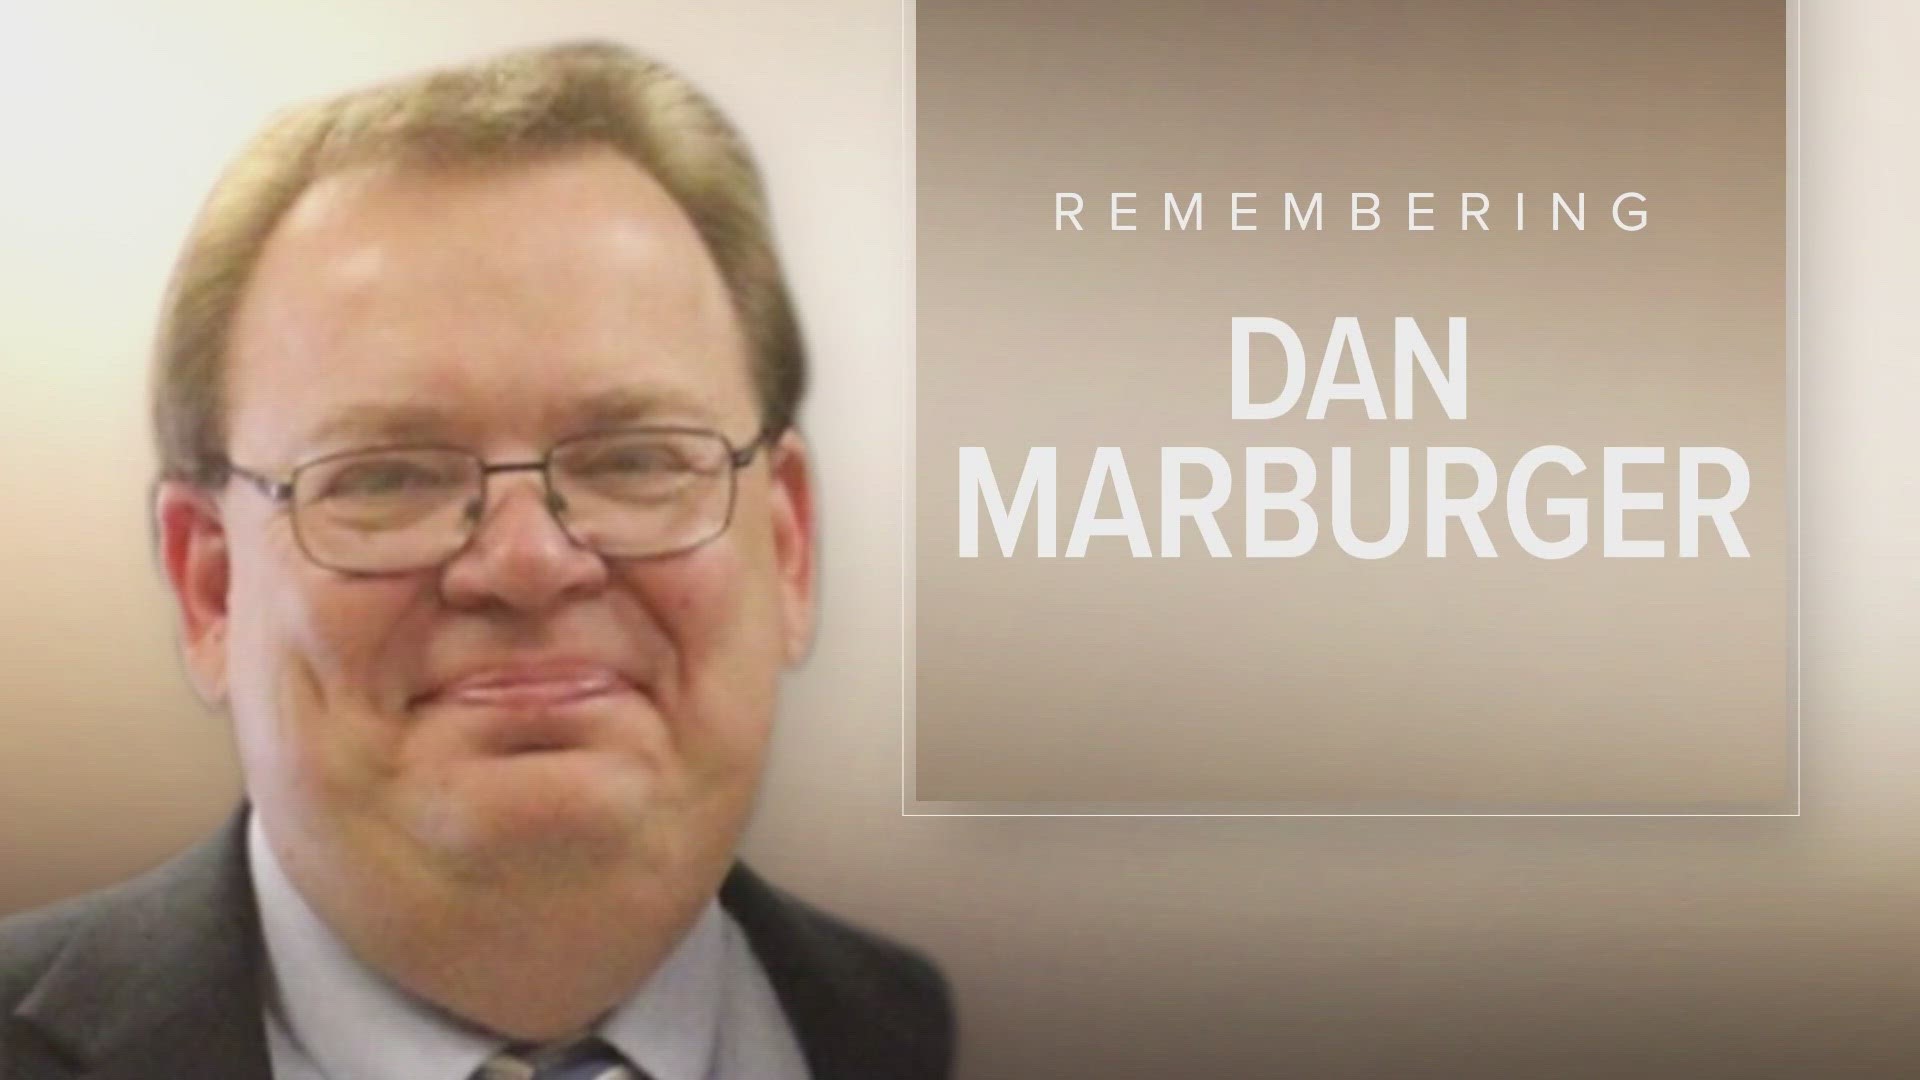 Students, staff, and community members lined the processional route to bid farewell to Marburger, who passed away Sunday at a Des Moines area hospital.